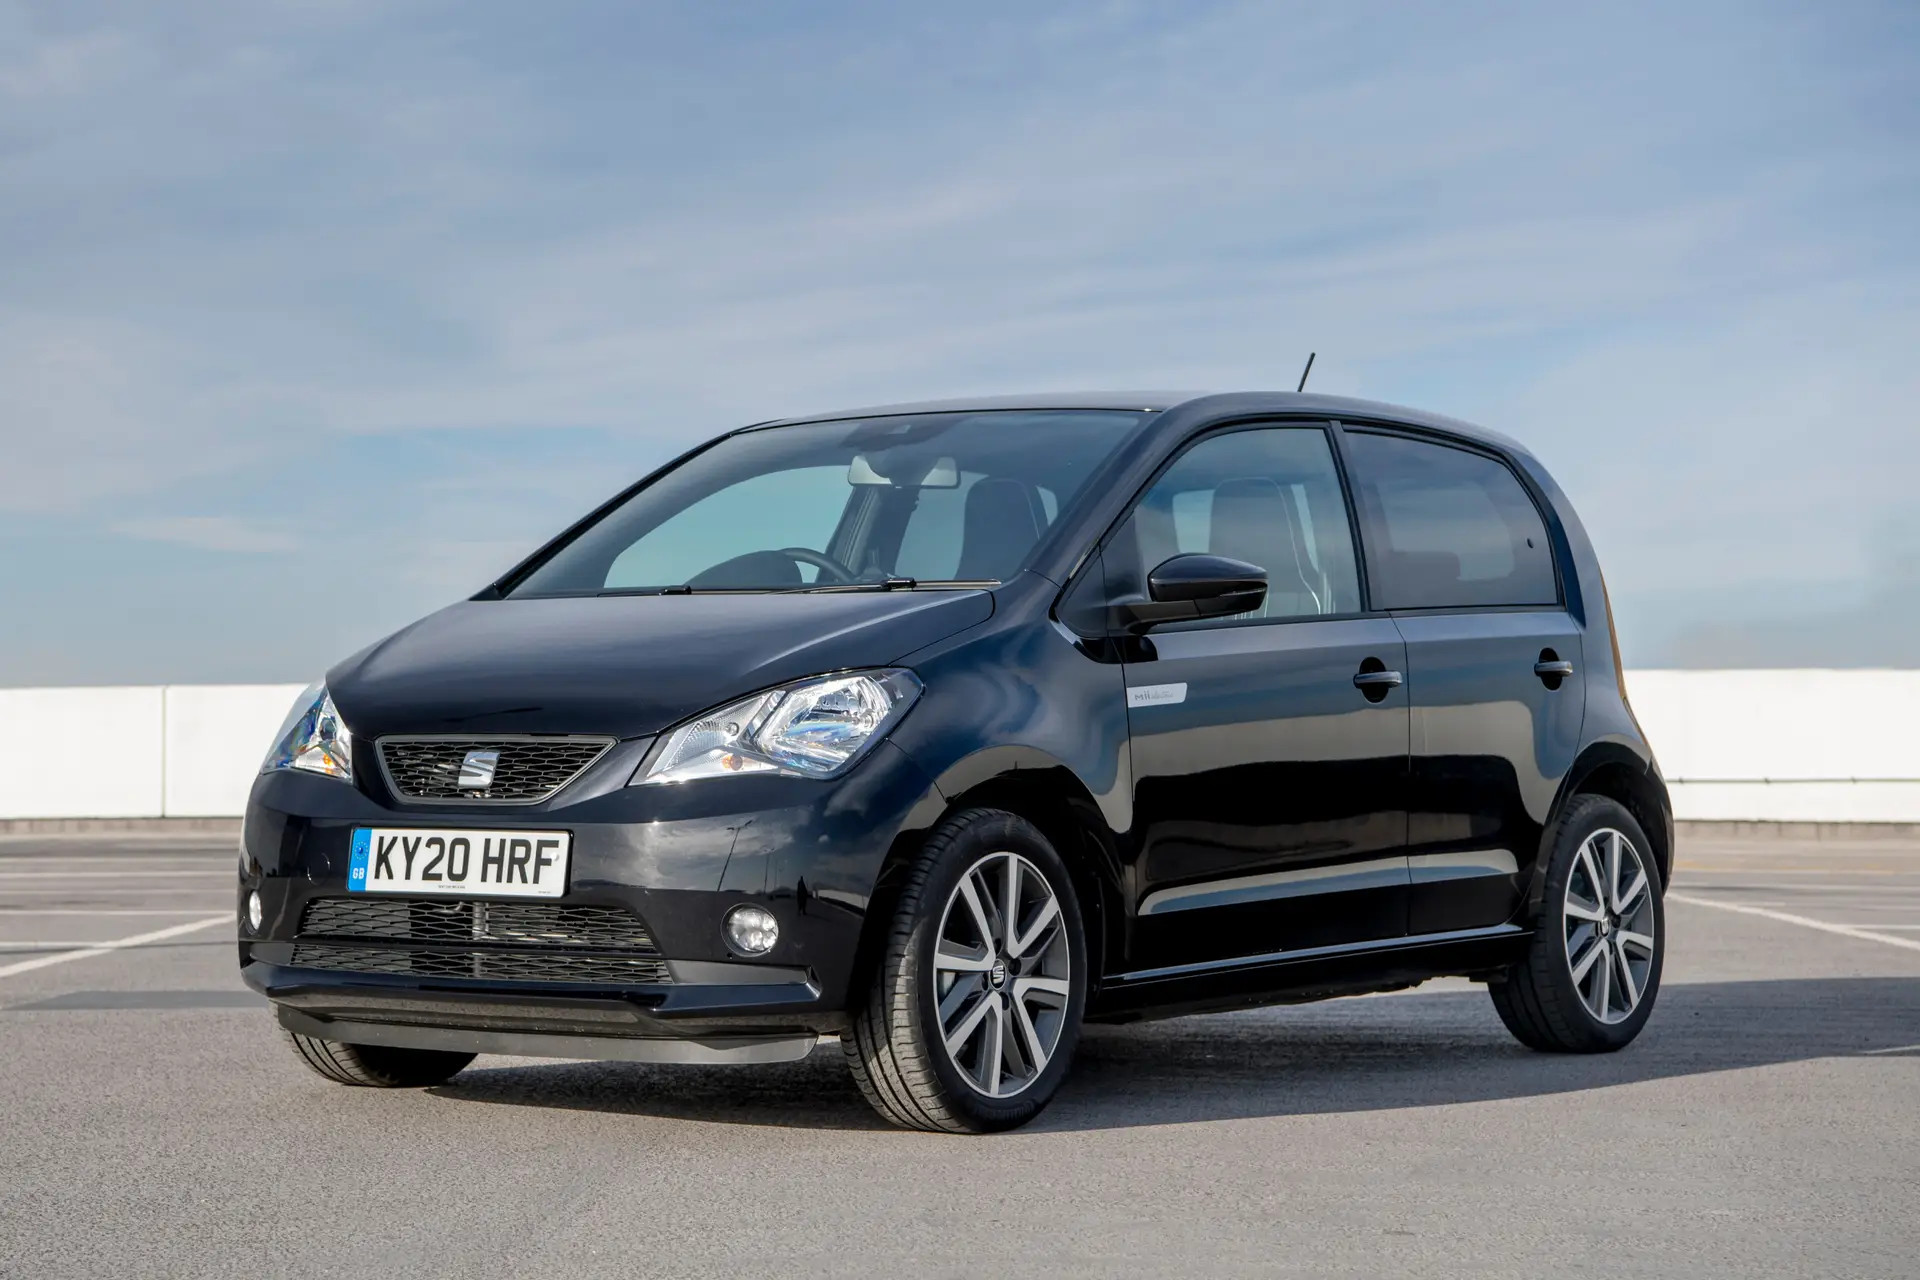 Five key features on the Seat Mii Electric